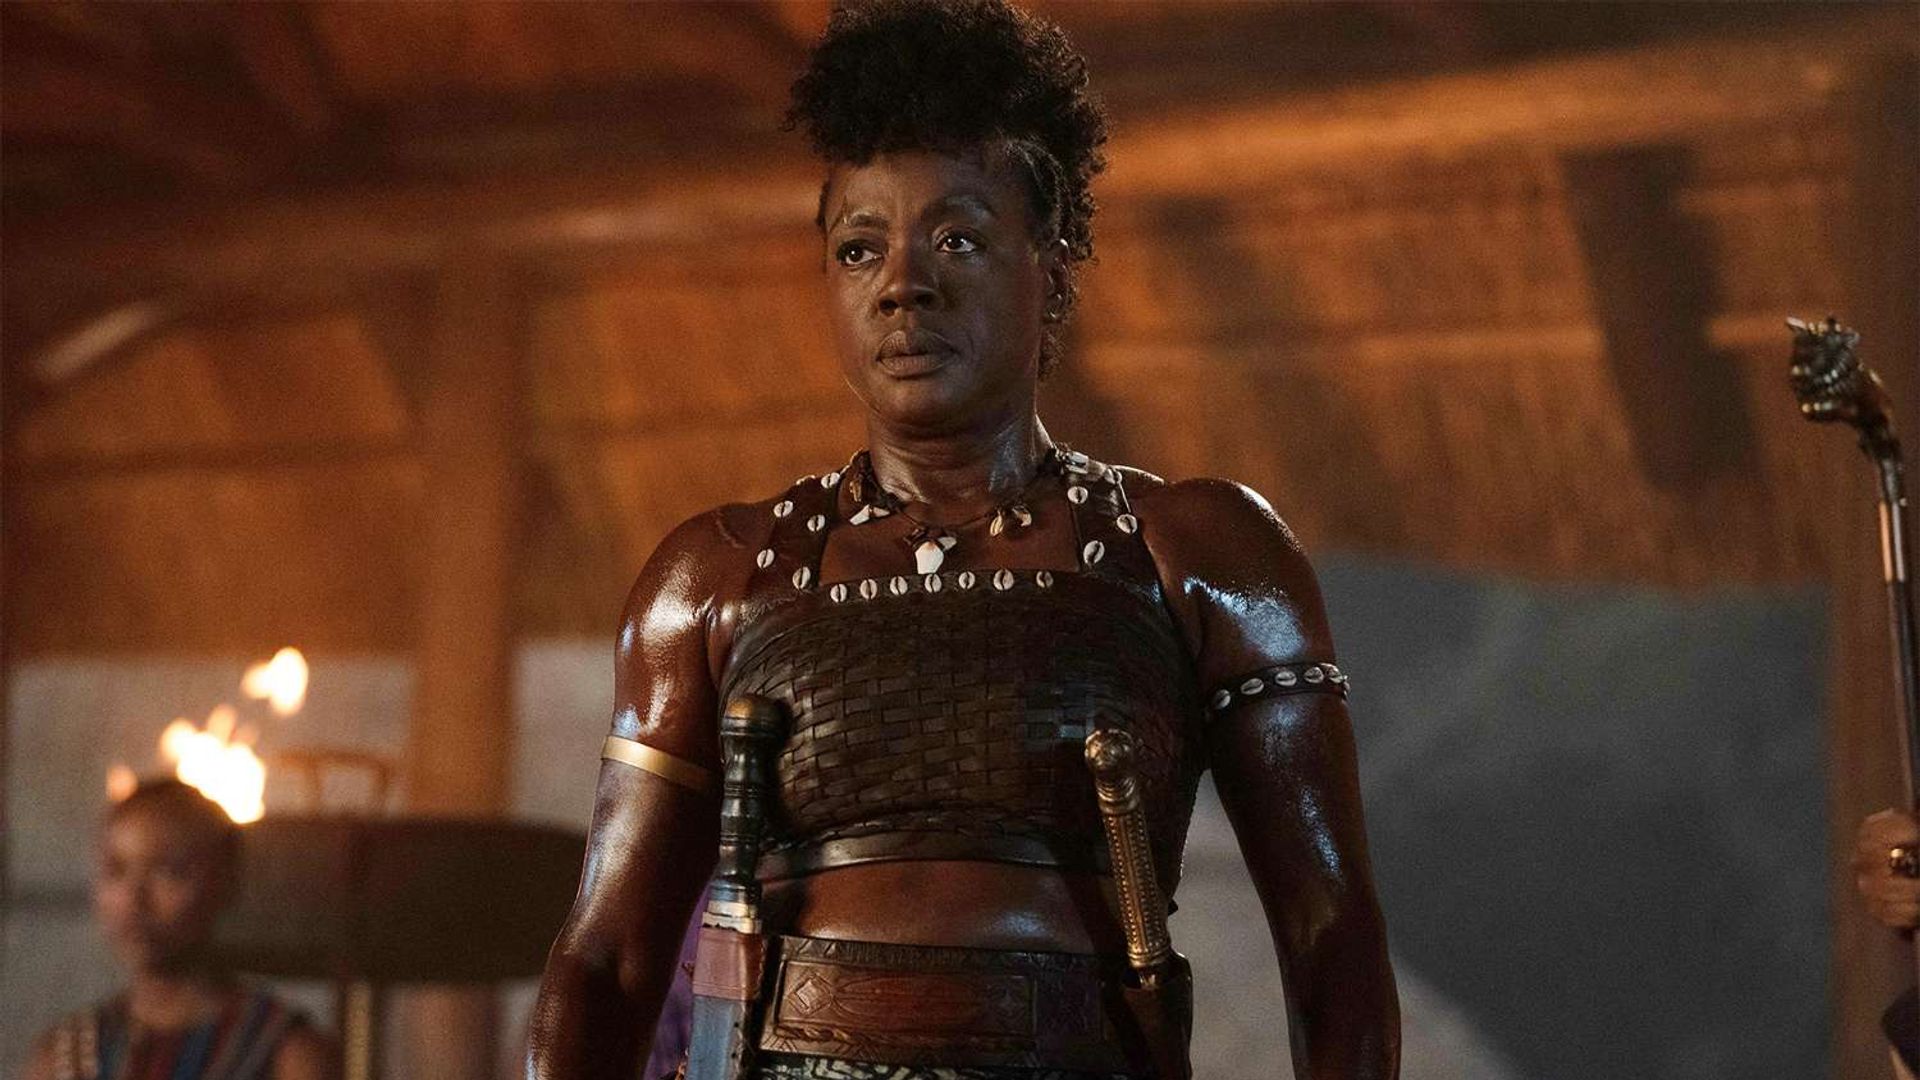 Viola Davis in the movie “The Woman King”